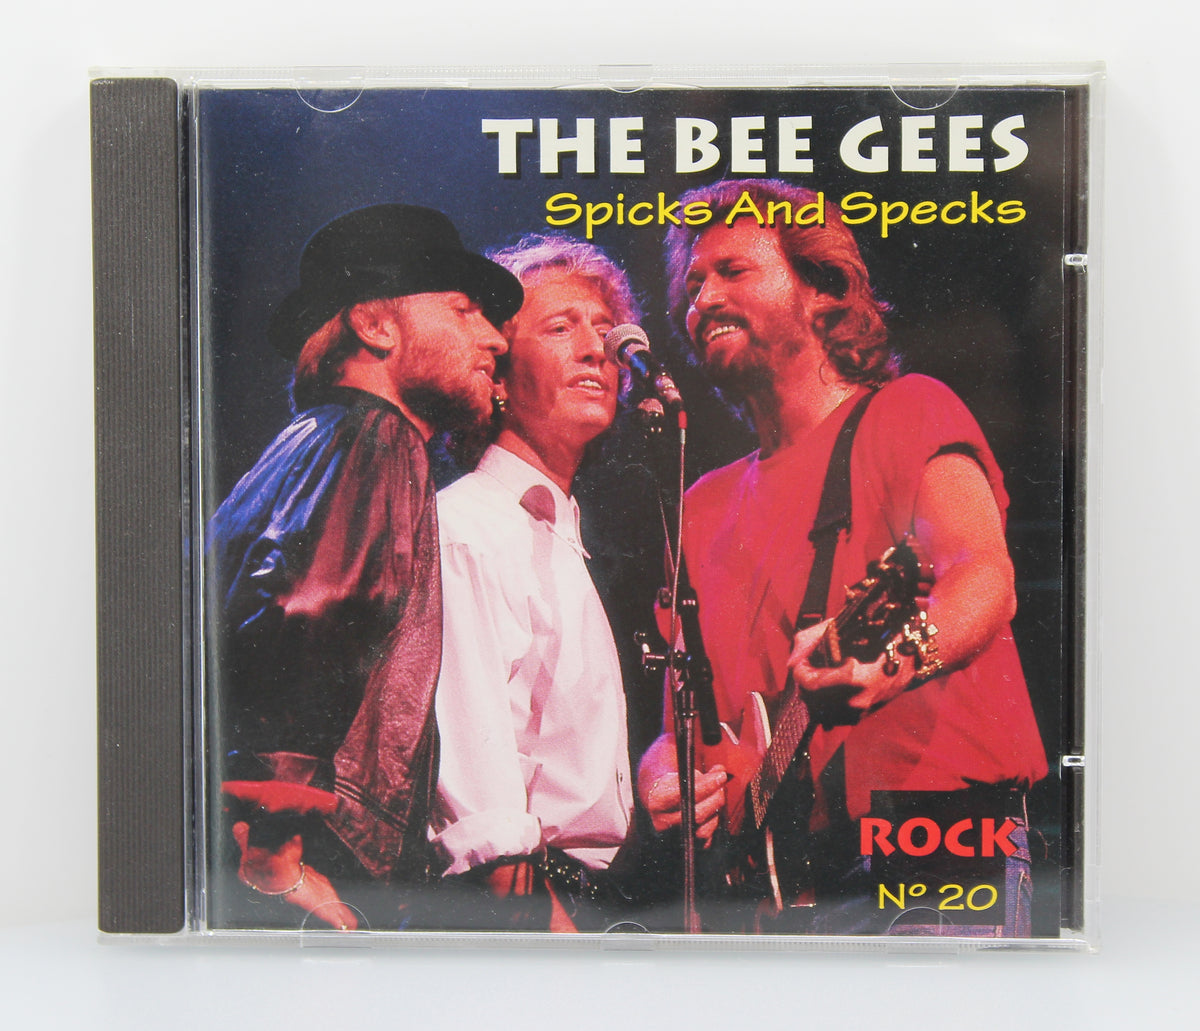 The Bee Gees – Spicks And Specks, CD, Compilation, Spain 1996